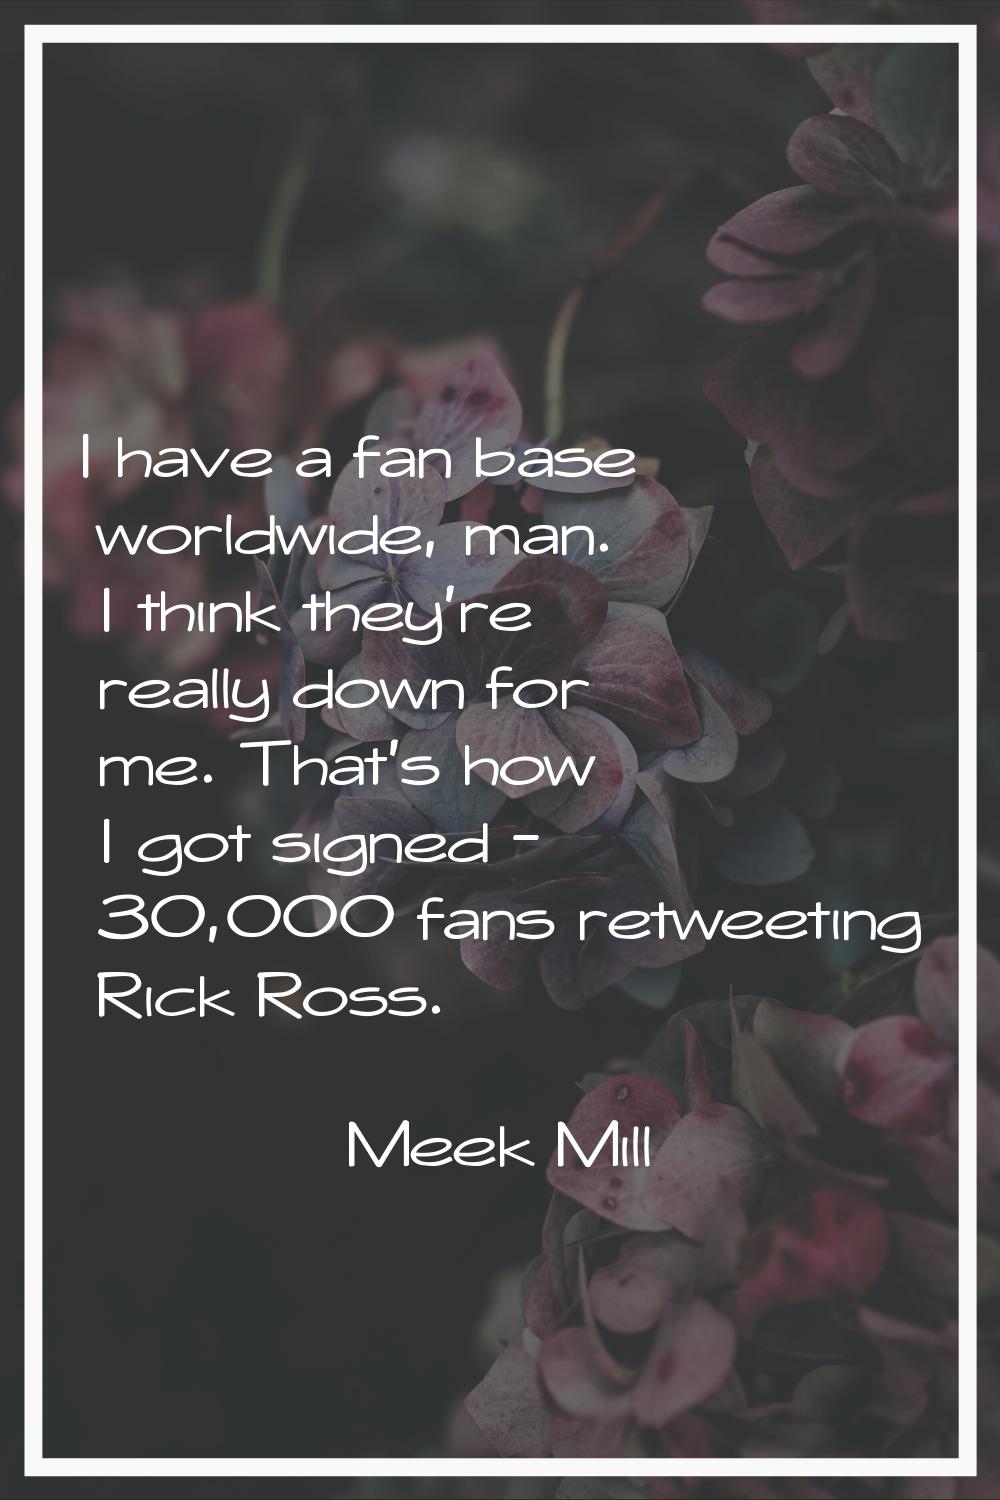 I have a fan base worldwide, man. I think they're really down for me. That's how I got signed - 30,